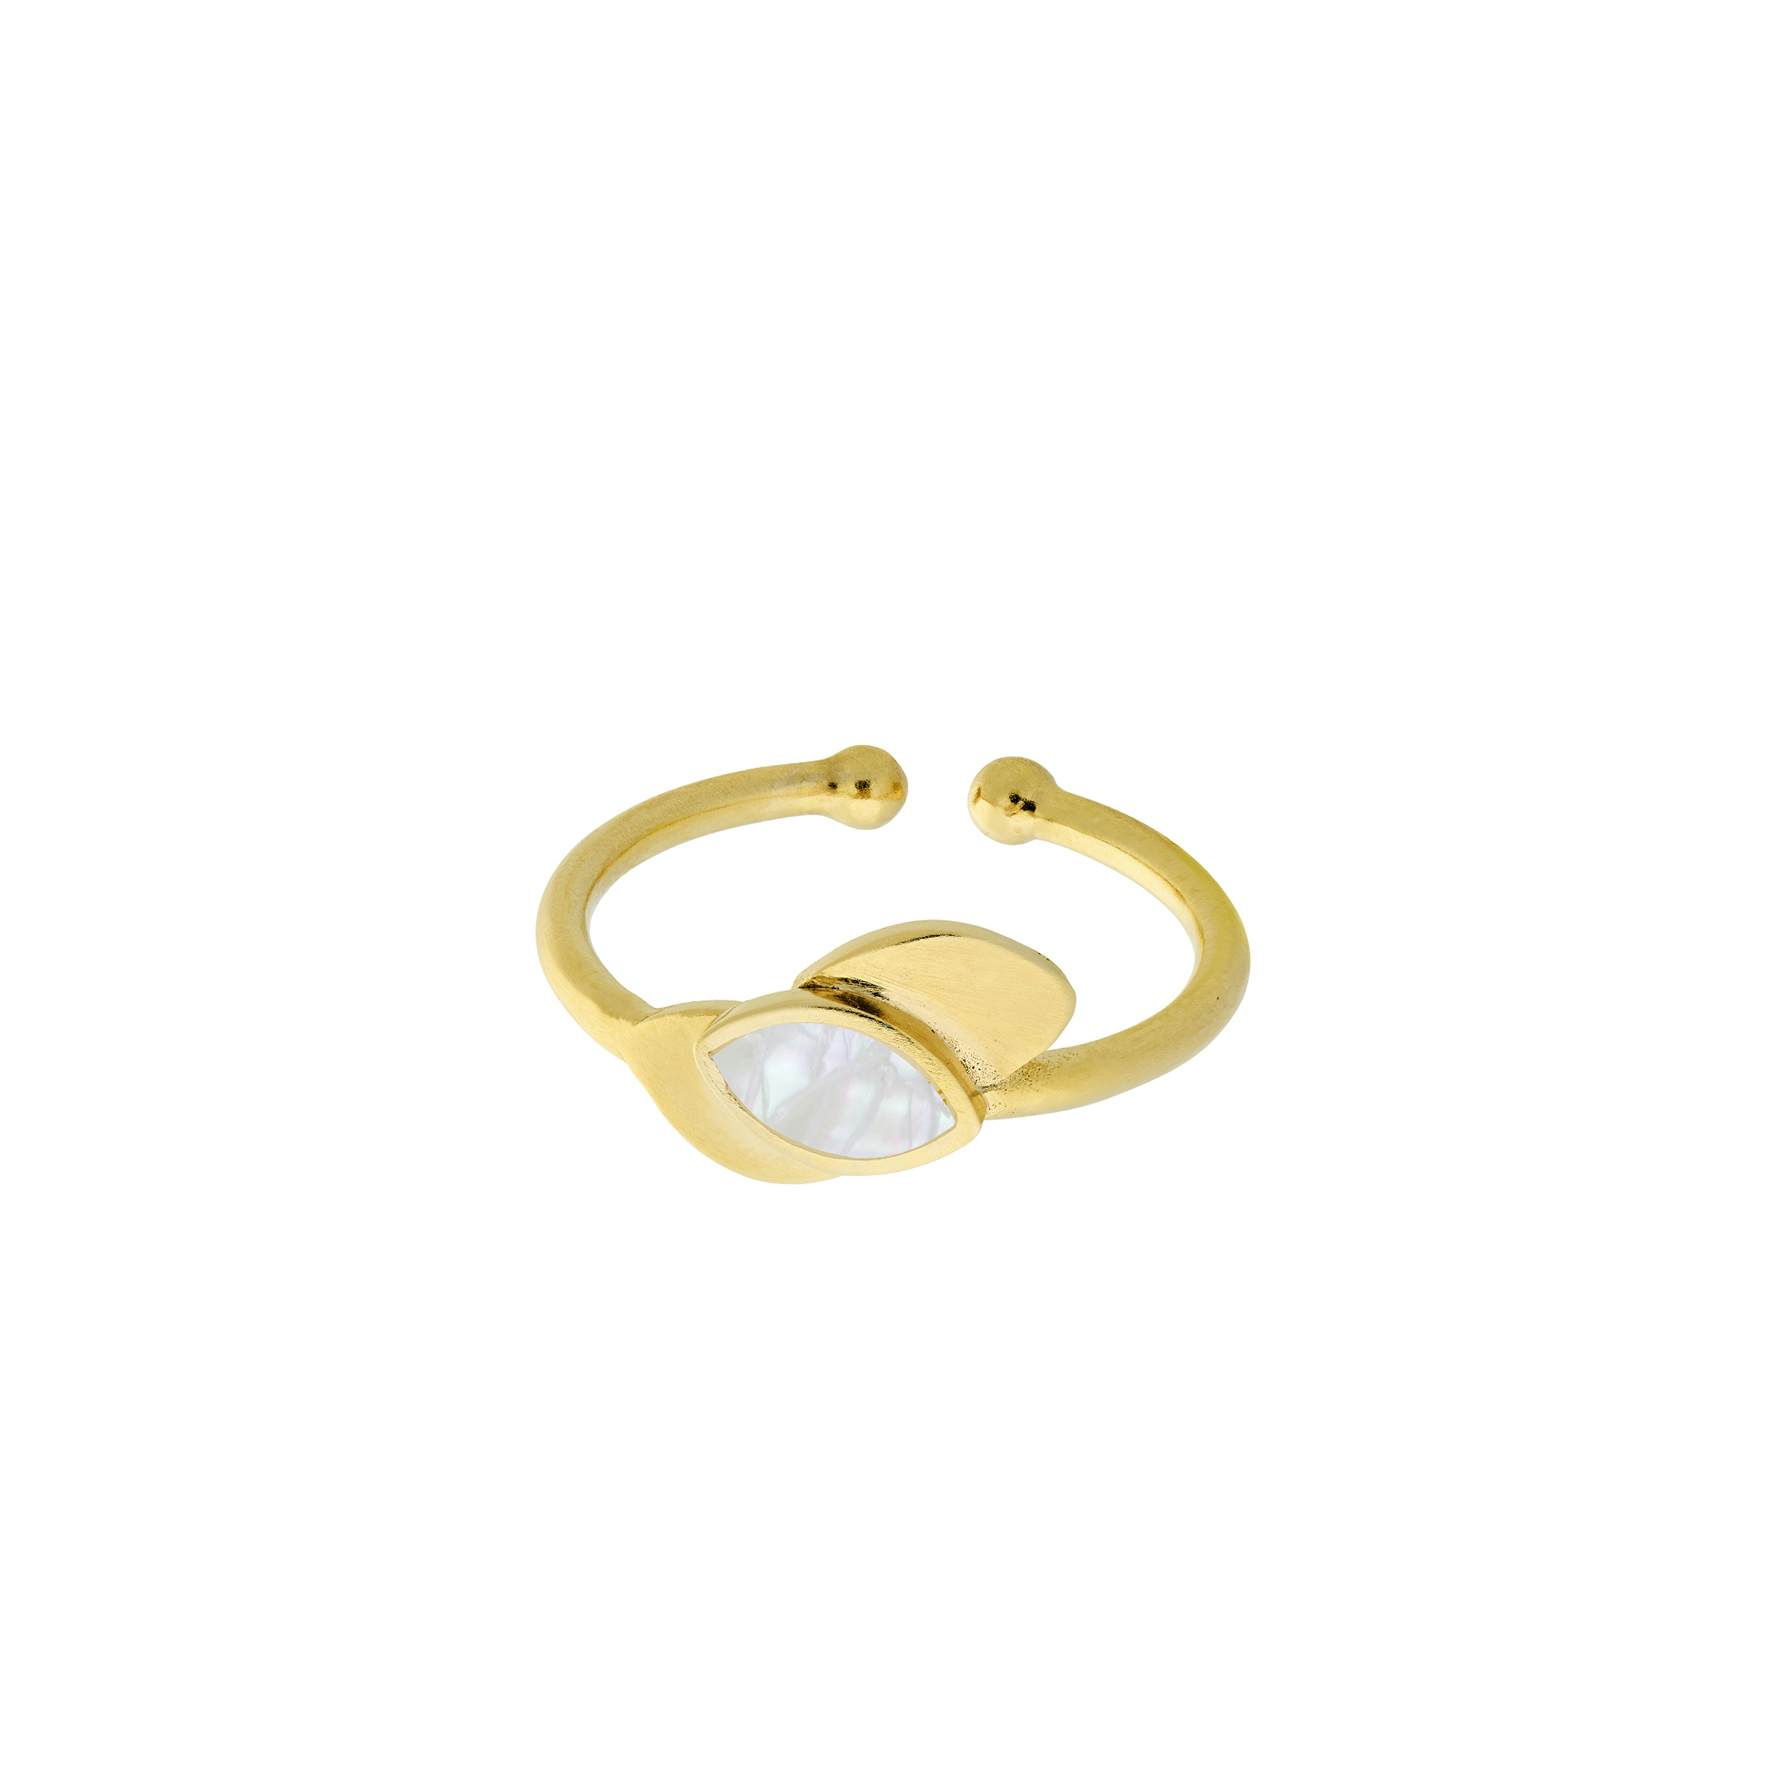 Flake Ring from Pernille Corydon in Goldplated-Silver Sterling 925